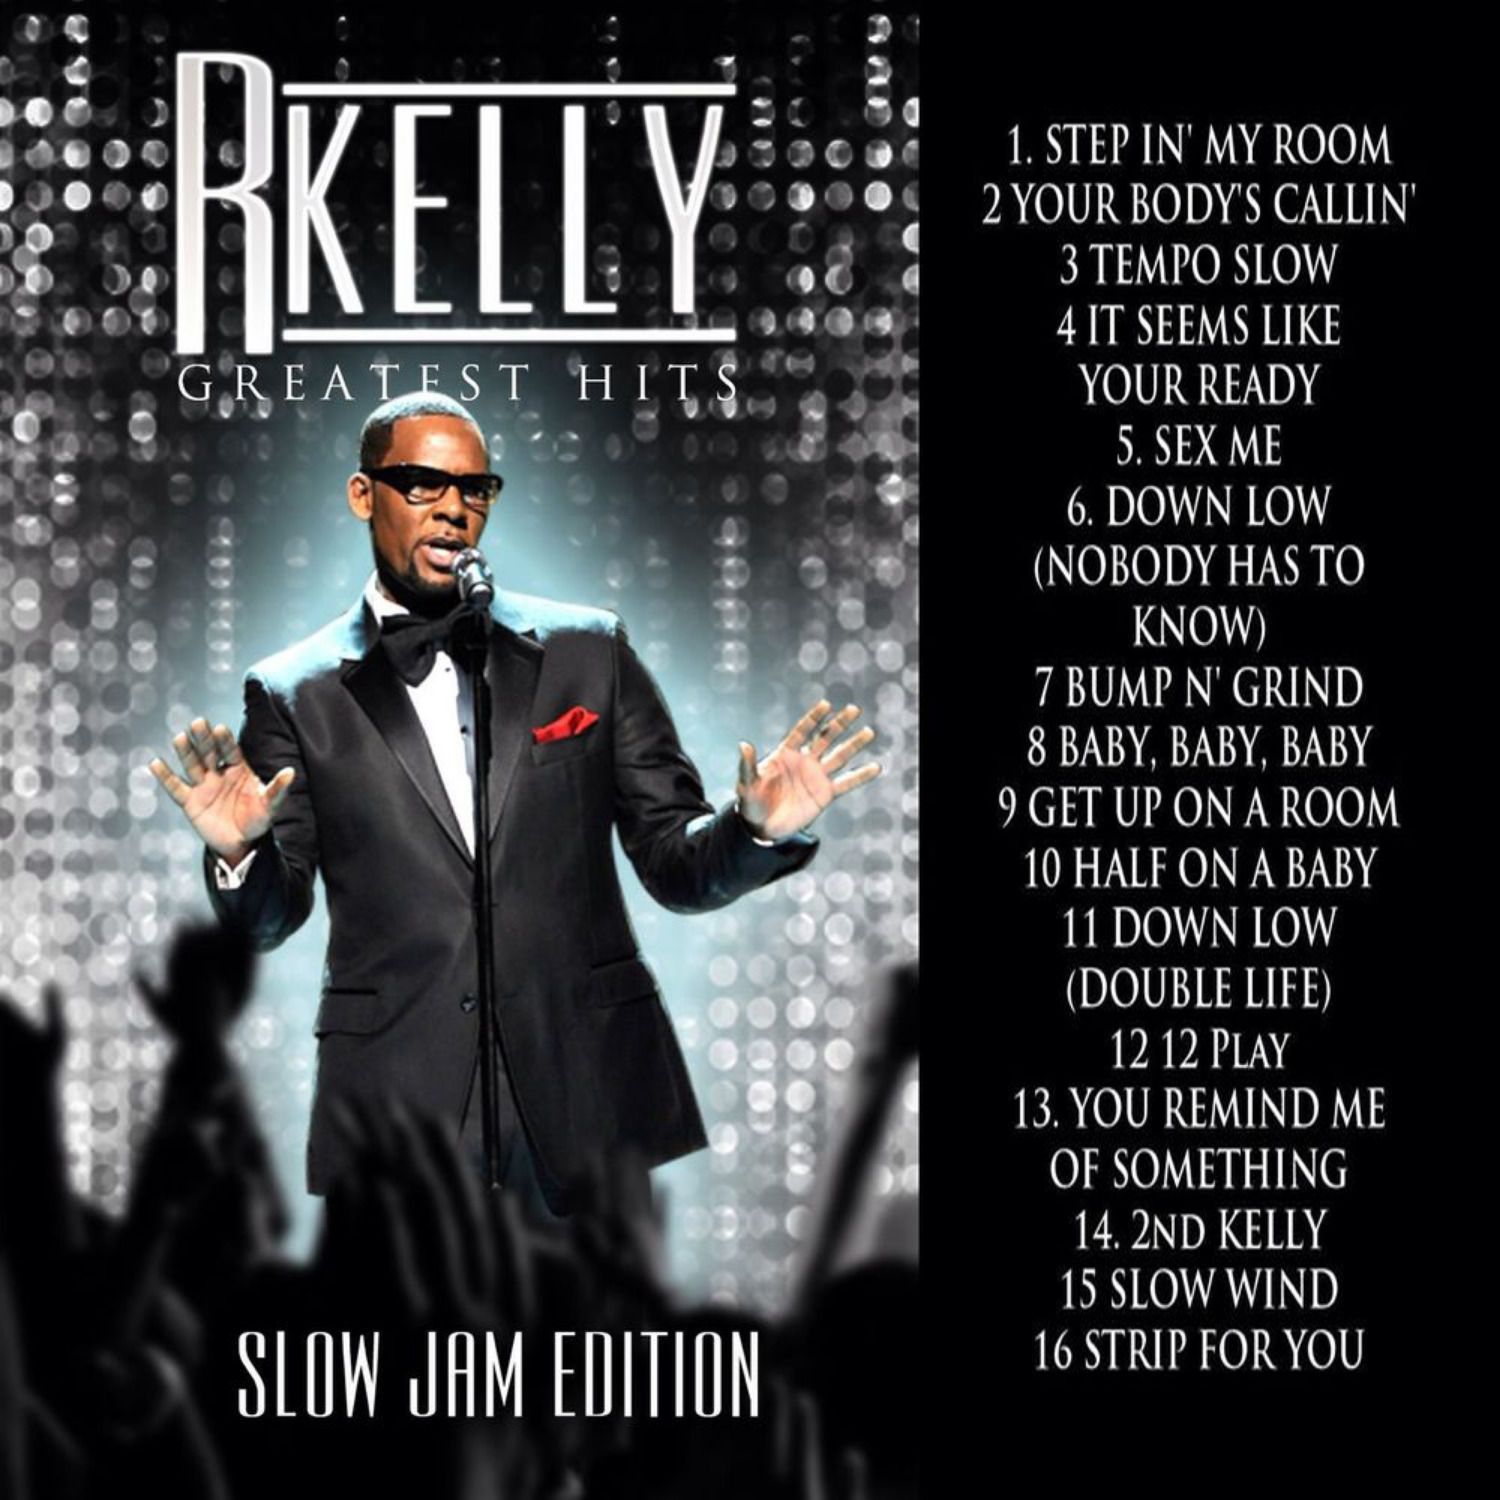 r kelly nothing on free download